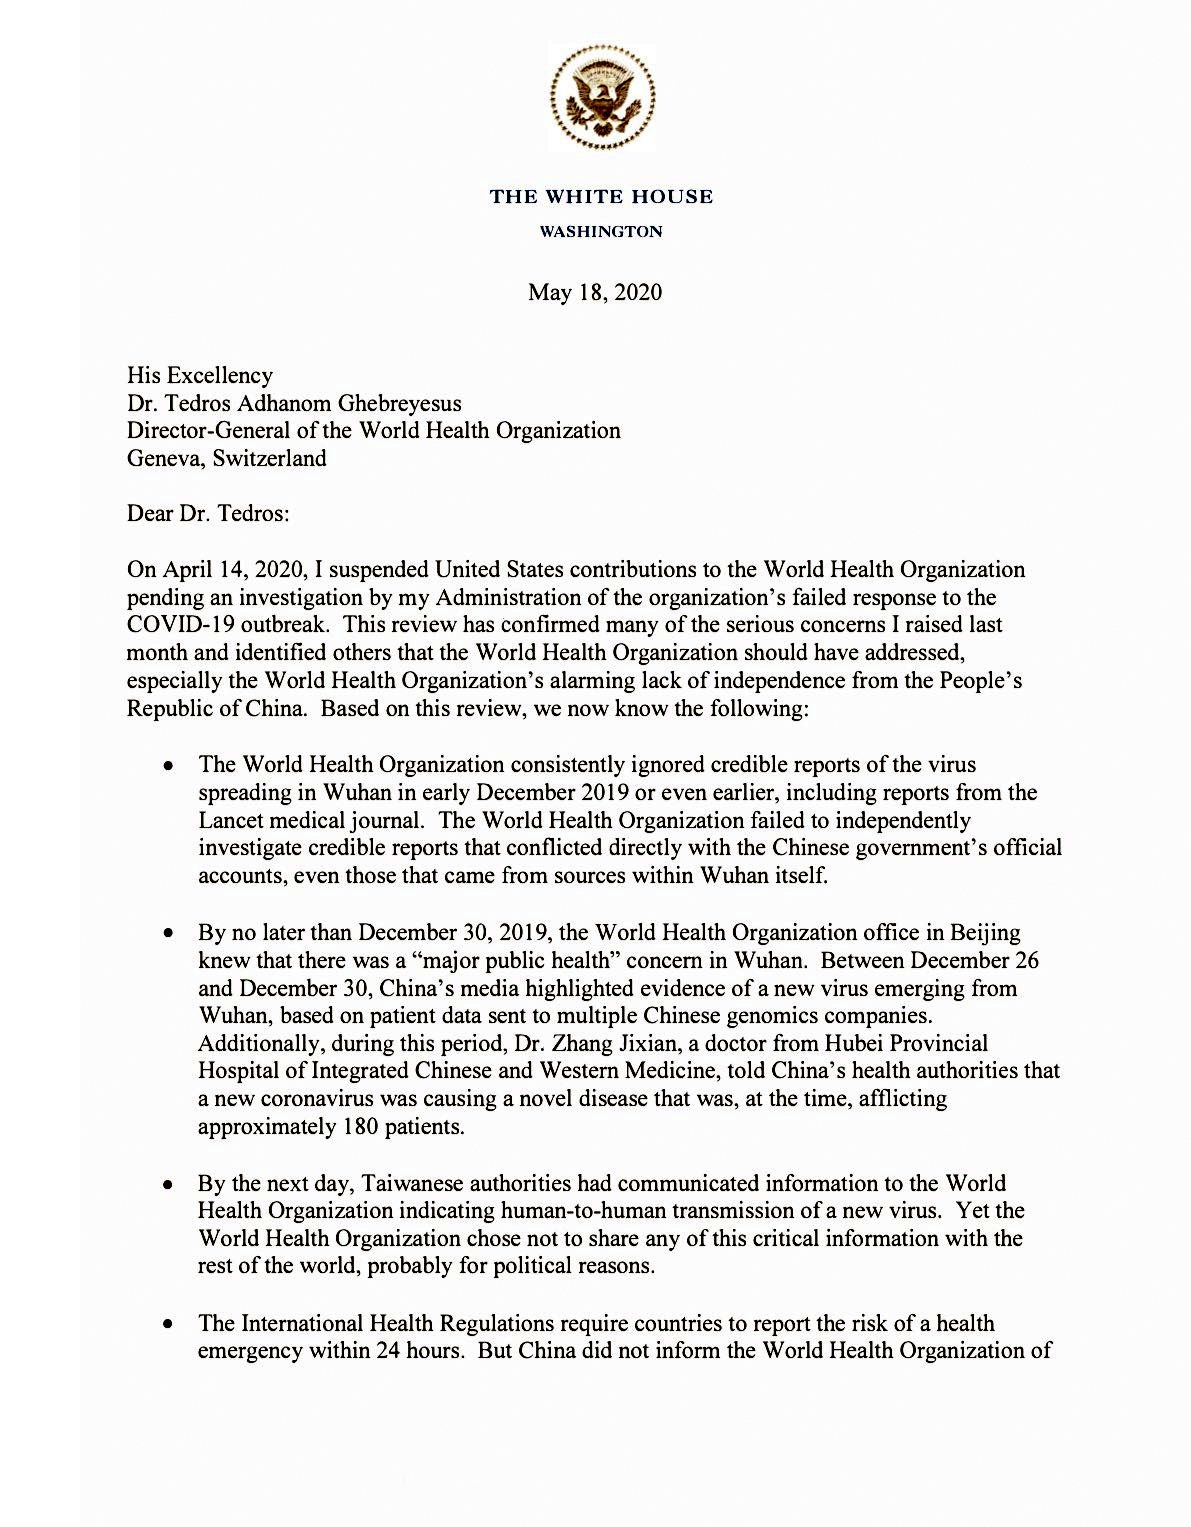 Trump's letter to WHO May 18, 2020, page 1